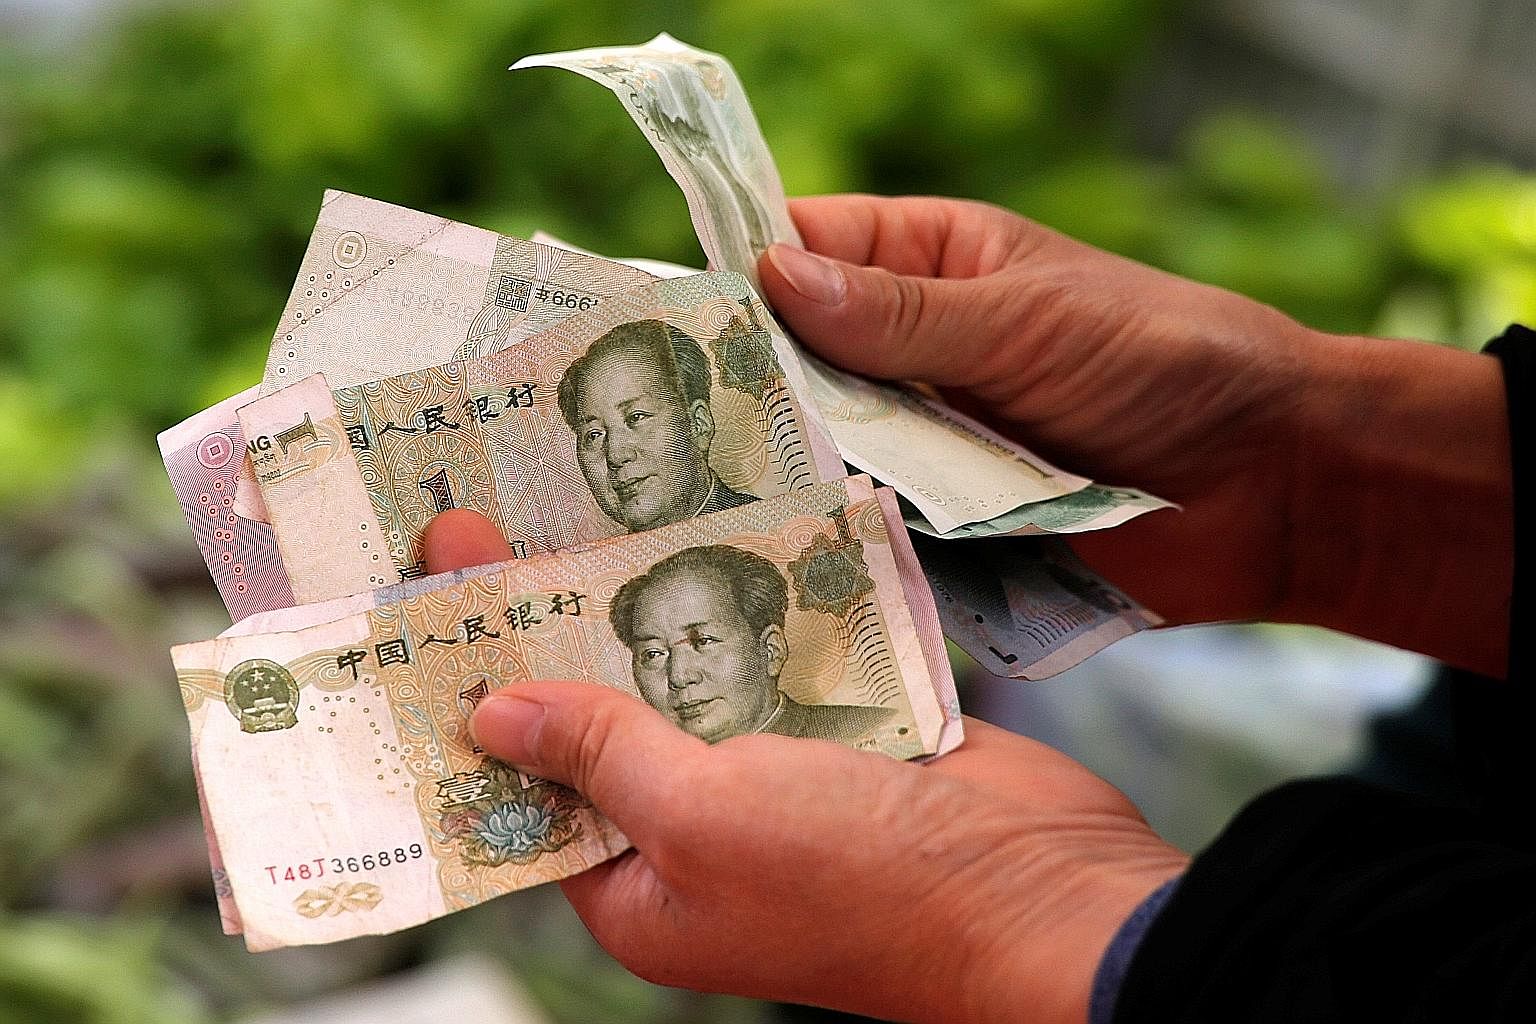 Even as the yuan becomes more widely used, whether or not it can become a trusted "store of value" for central banks around the world - comparable to the greenback, pound, euro and yen - will depend on the success of financial market reforms in China